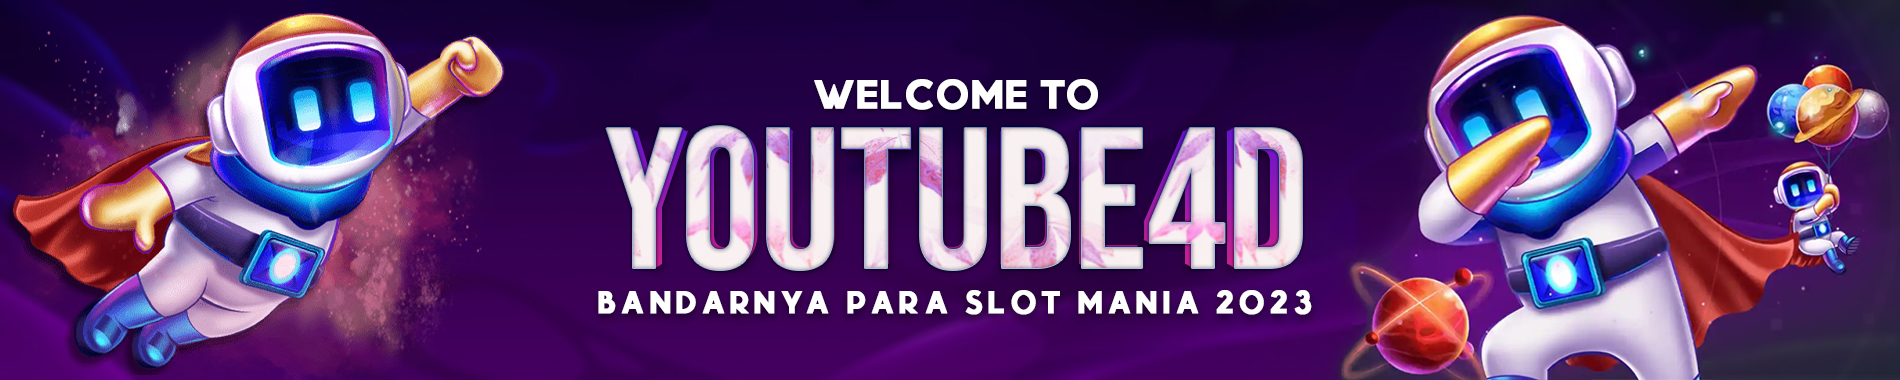 YOUTUBE4D WELCOME